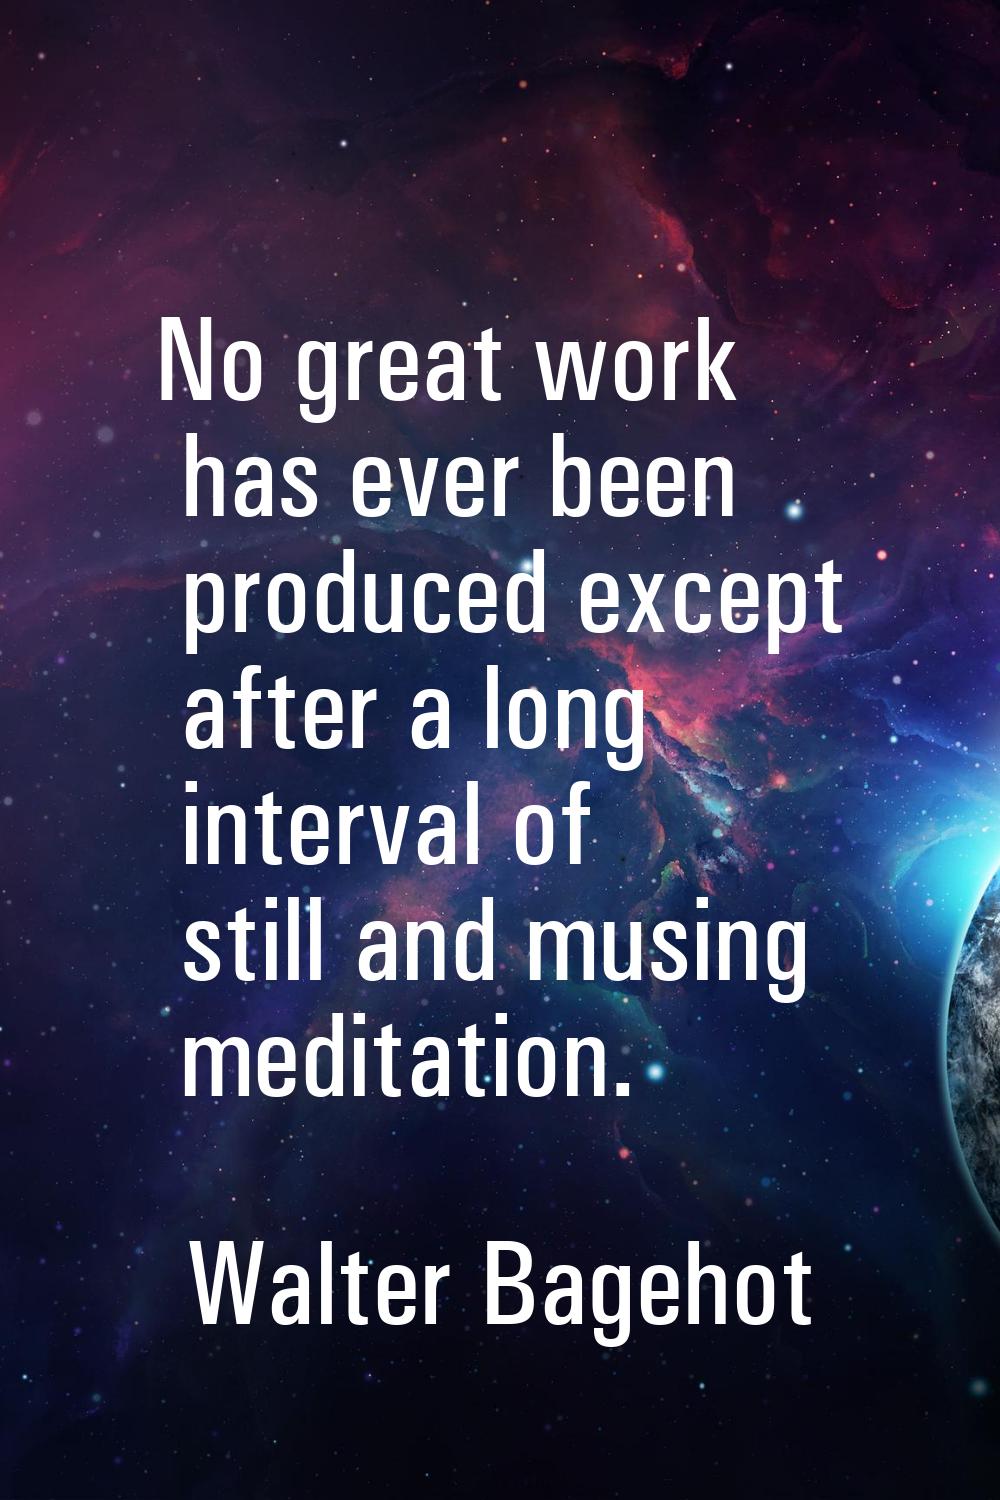 No great work has ever been produced except after a long interval of still and musing meditation.